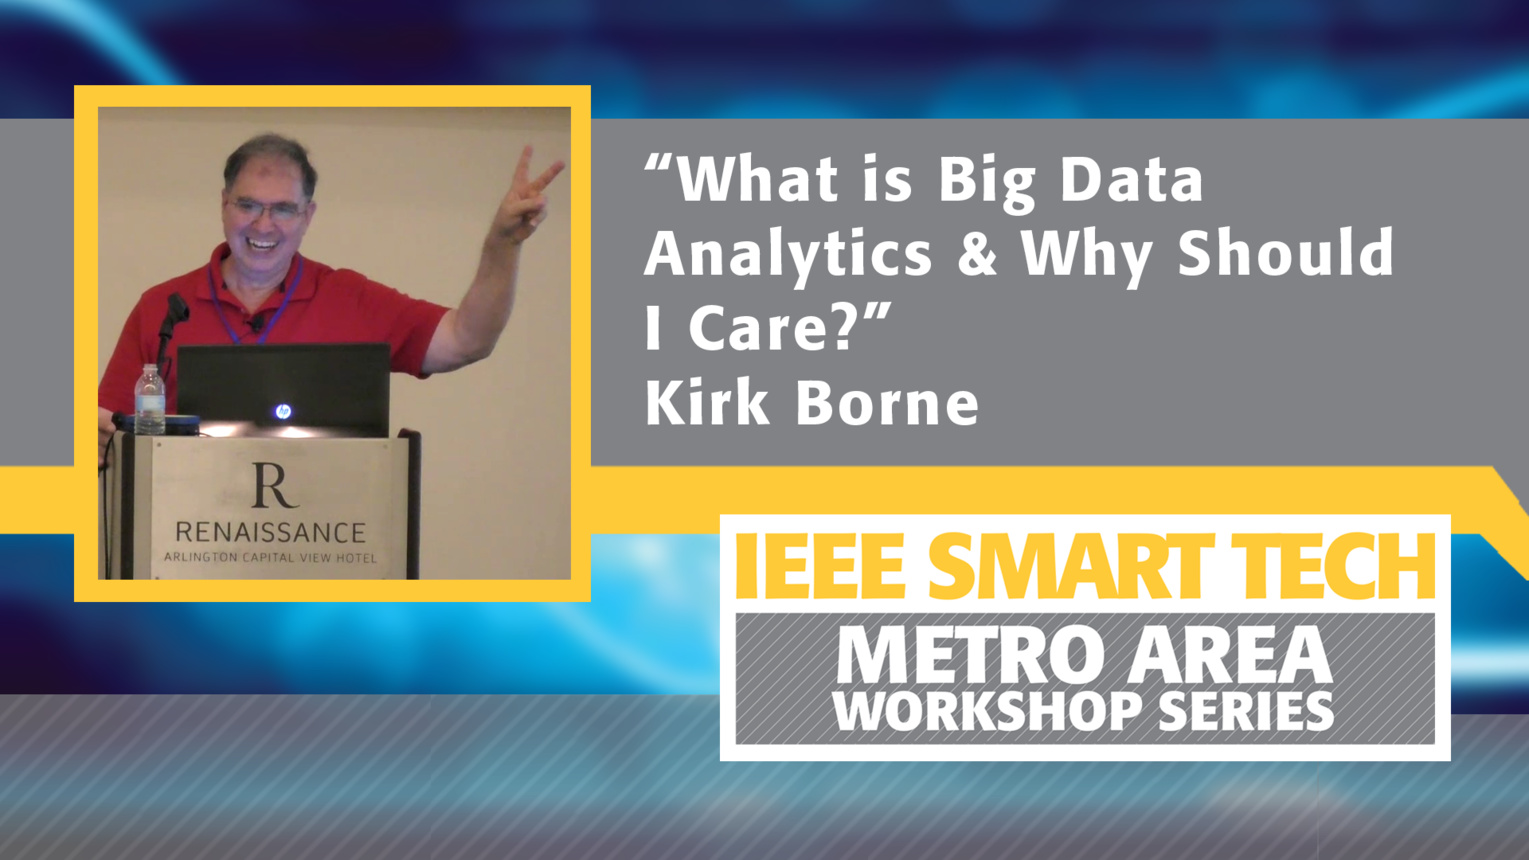 "What is Big Data Analytics and Why Should I Care?"